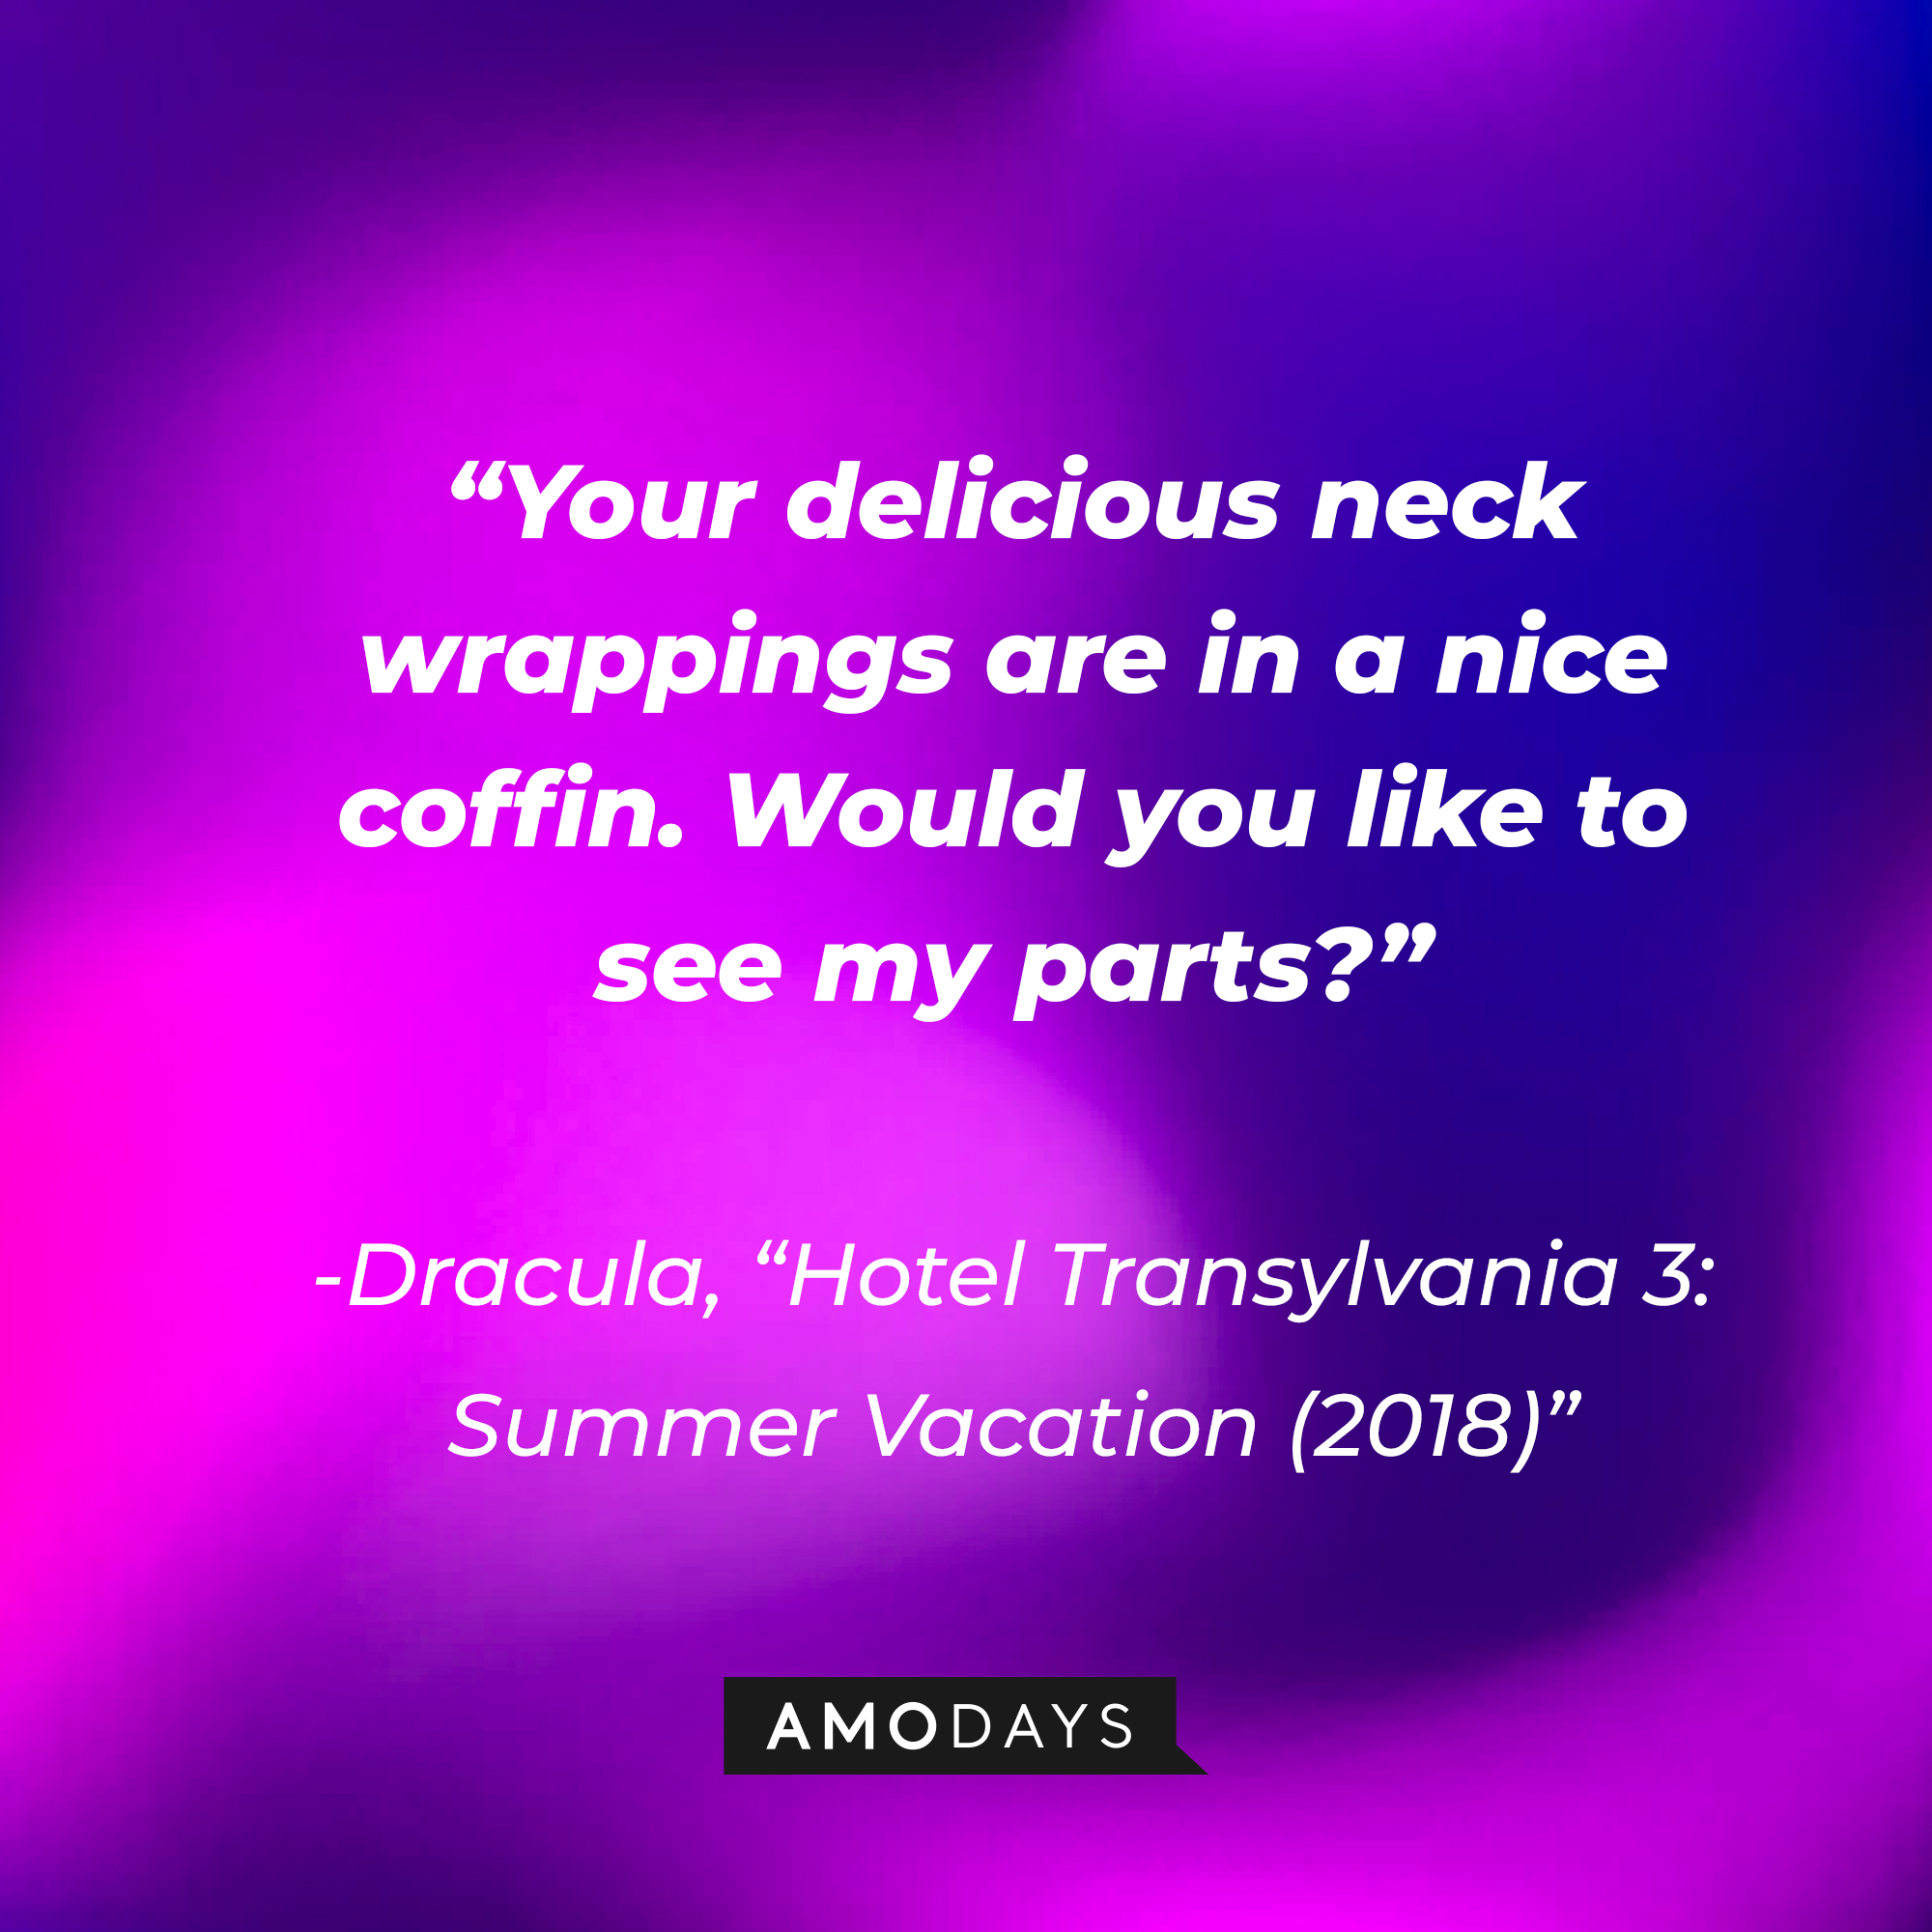 Dracula's quote: “Your delicious neck wrappings are in a nice coffin. Would you like to see my parts?” | Source: Amodays